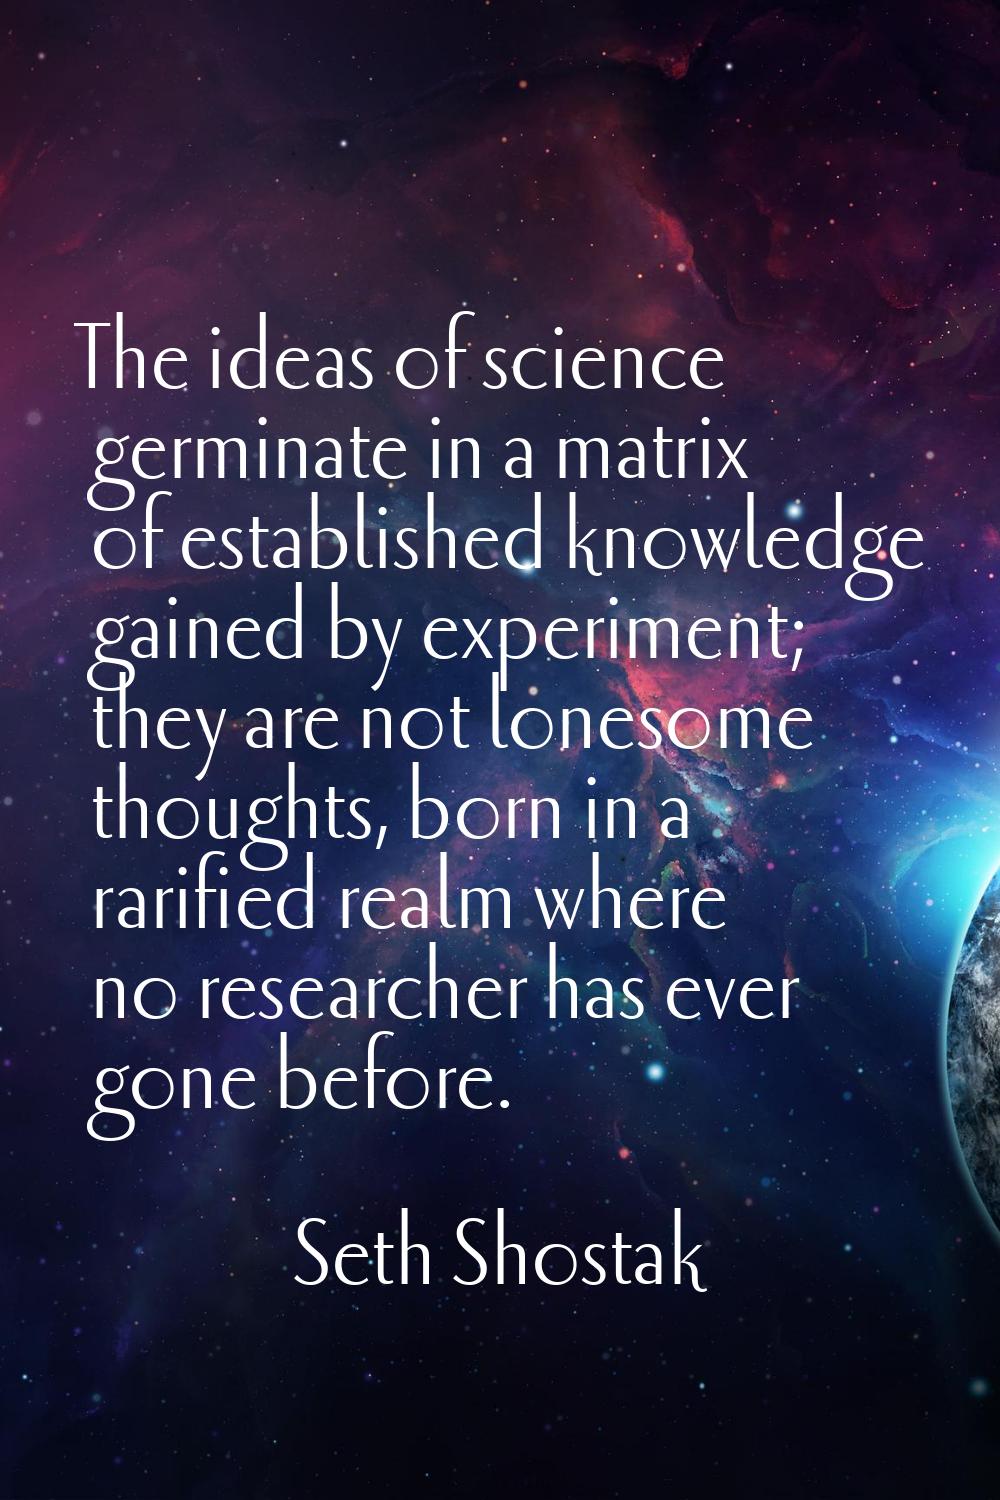 The ideas of science germinate in a matrix of established knowledge gained by experiment; they are 